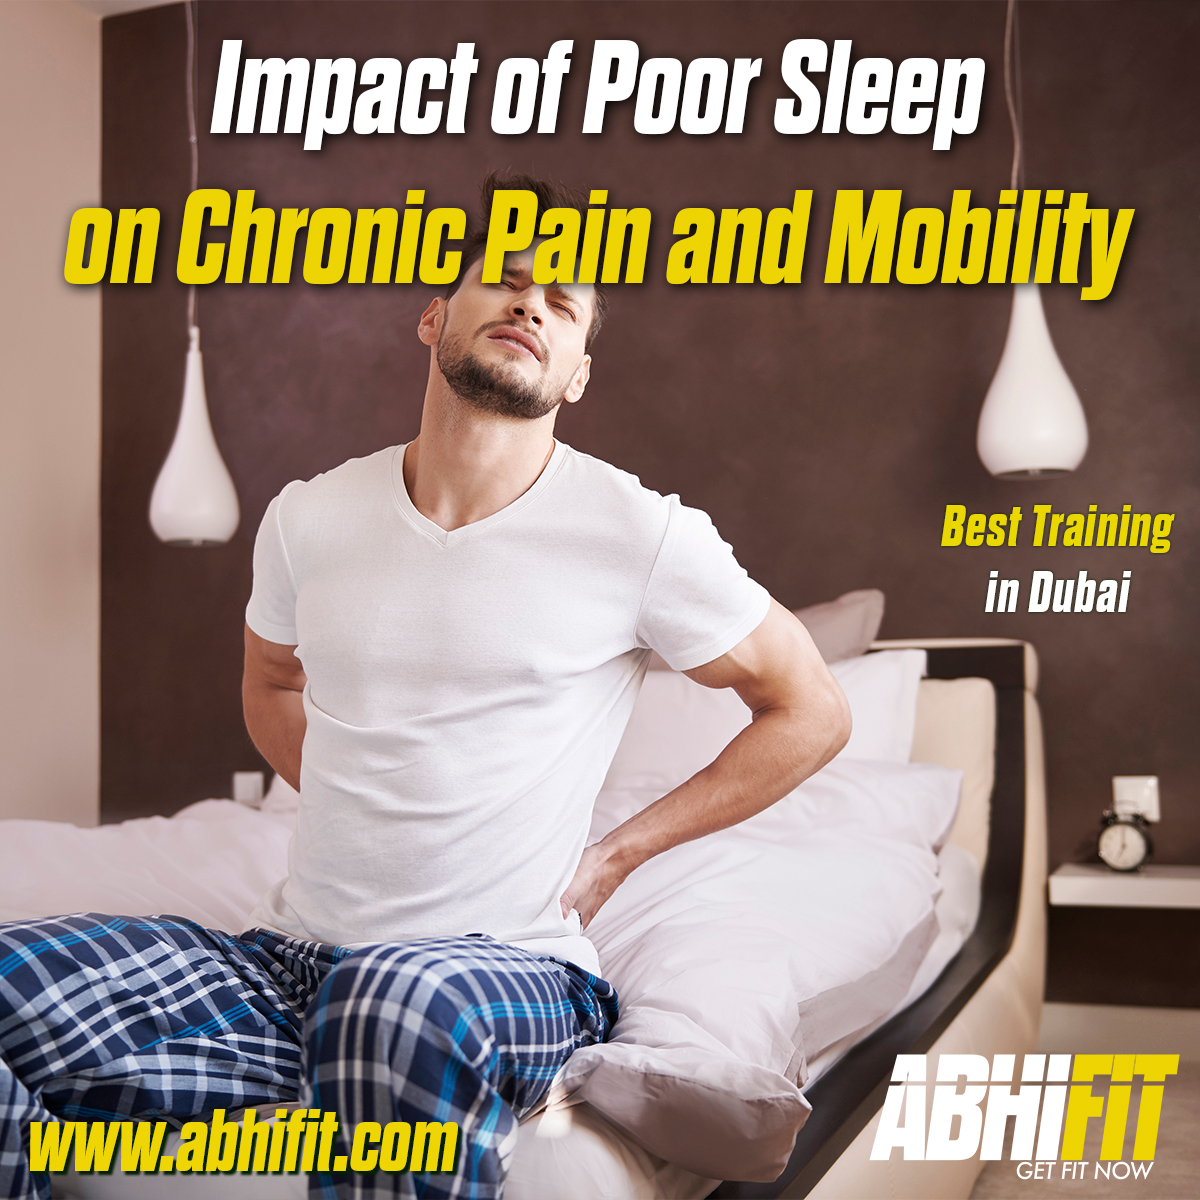 Impact of Poor Sleep on Chronic Pain and Mobility - Best Personal Training and Trainers in Dubai by Abhinav Malhotra and Team AbhiFit UAE